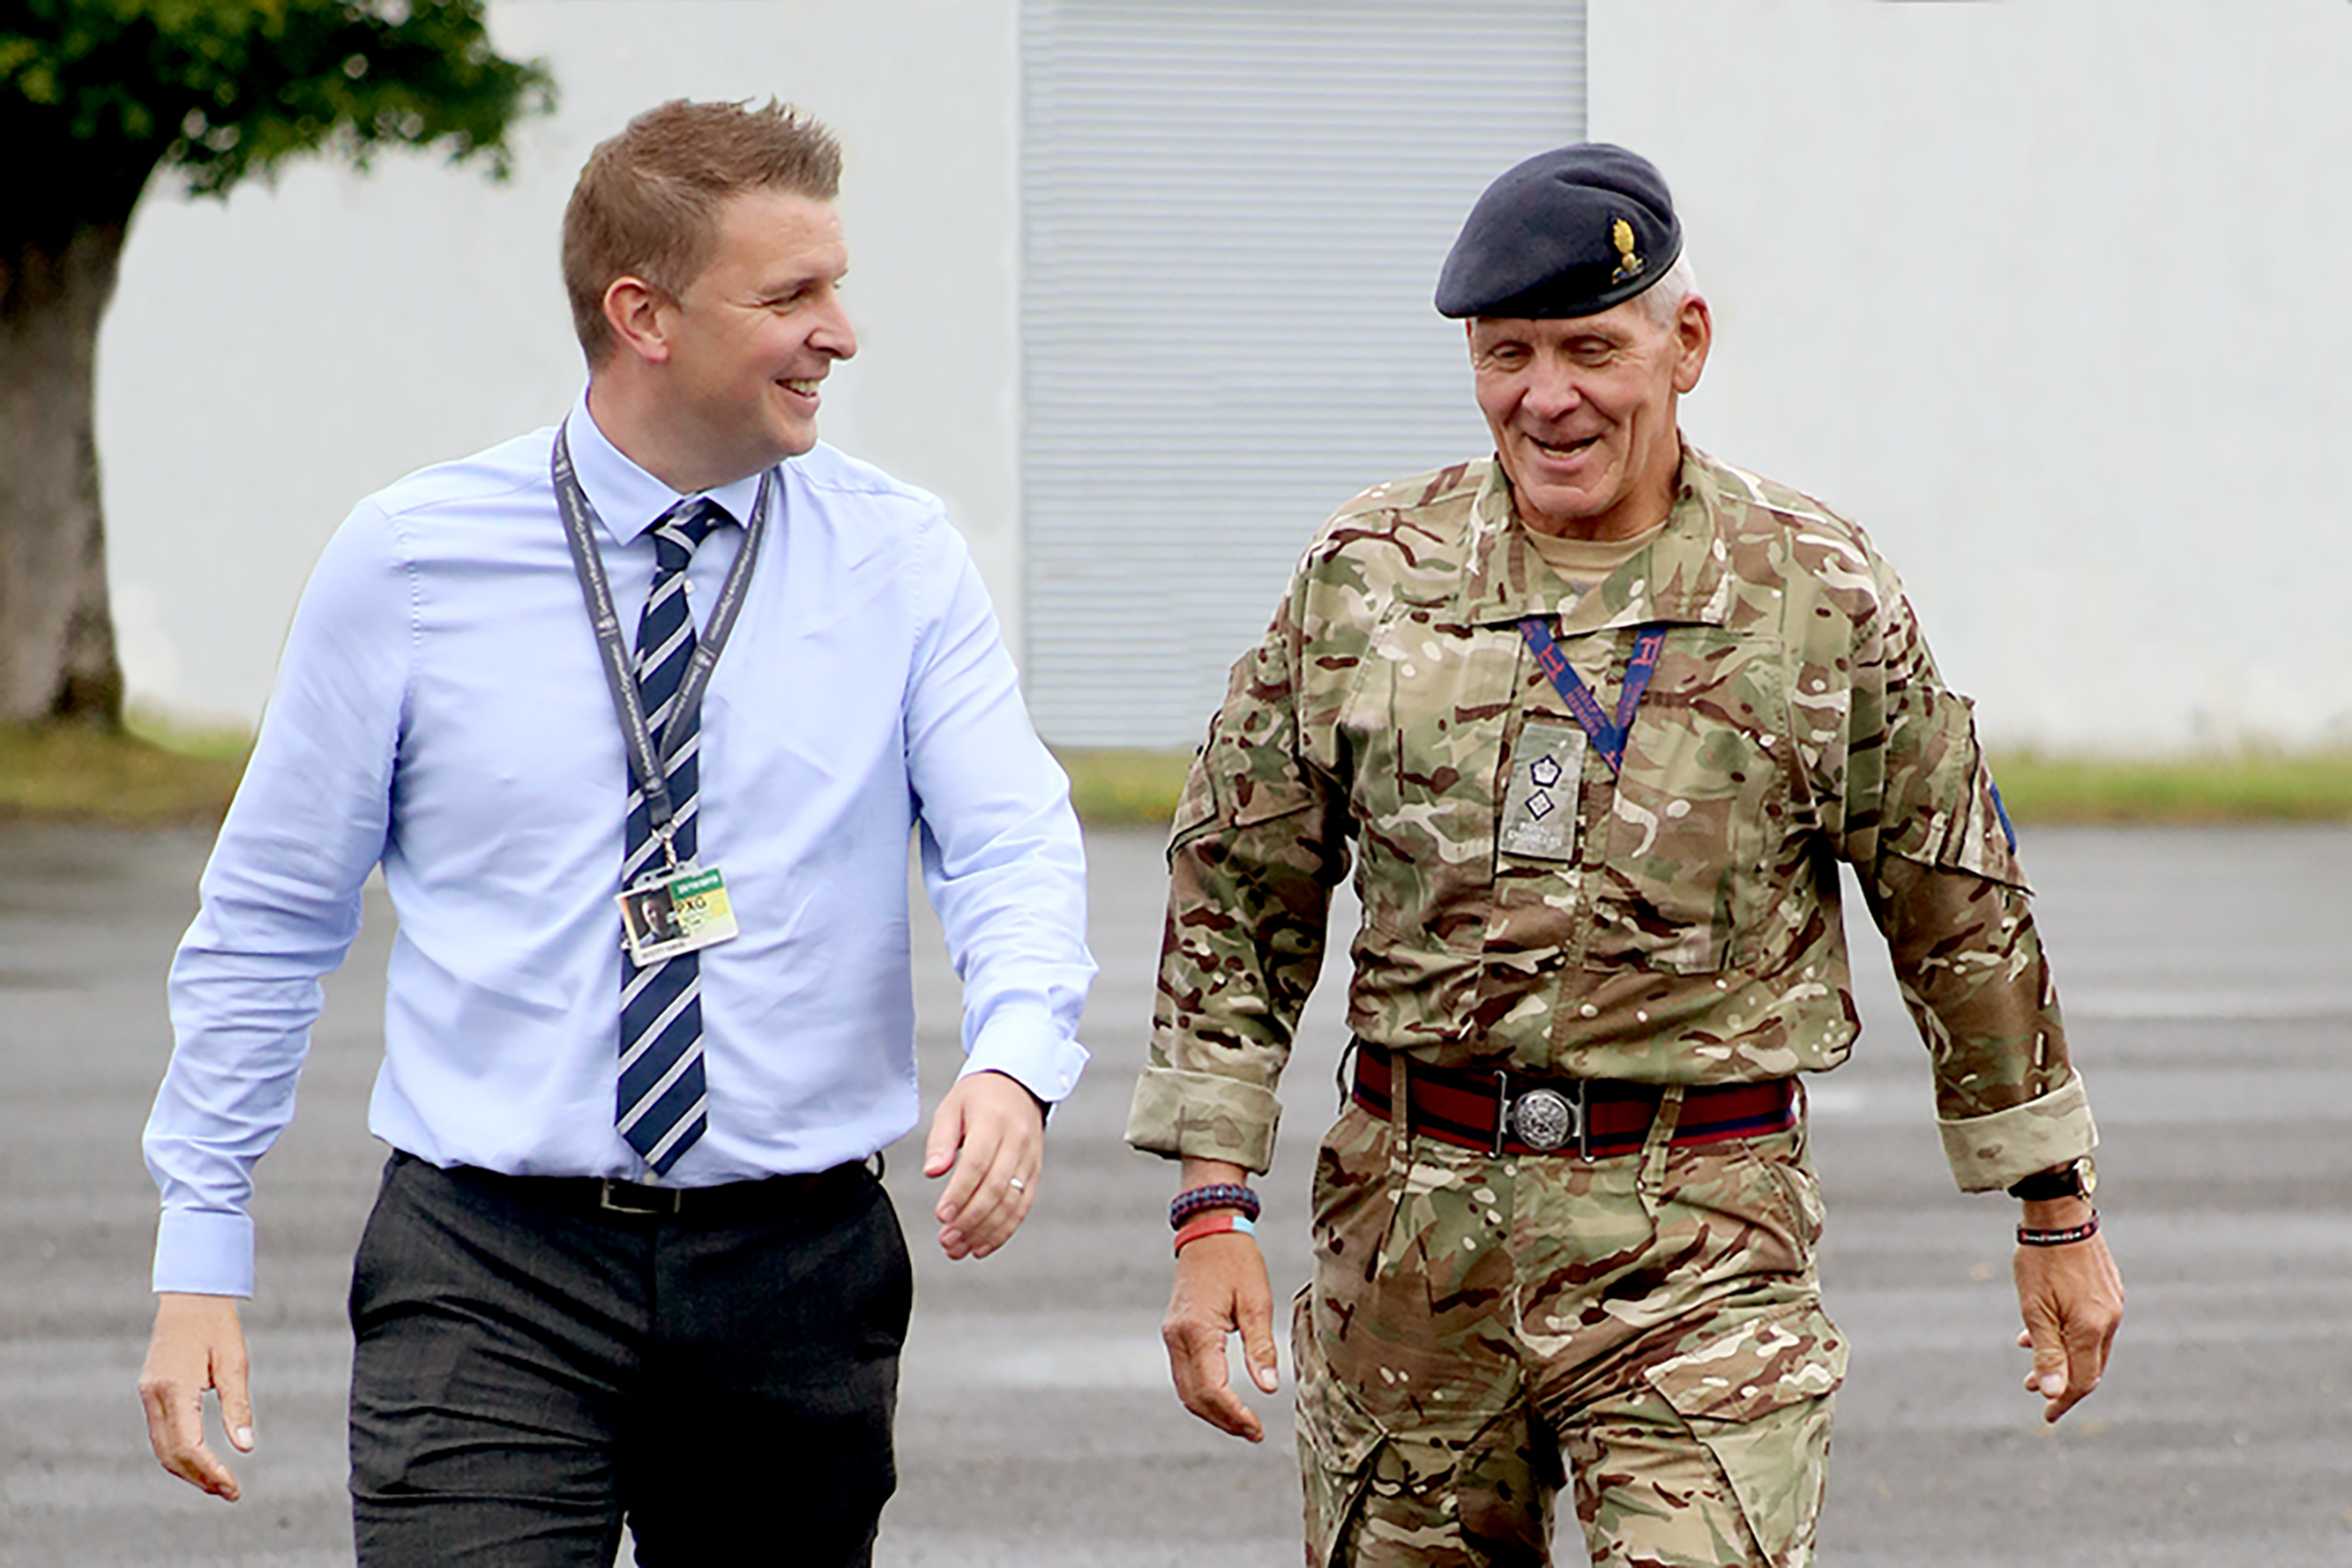 A manager from Head Office is walking with a man in military uniform.